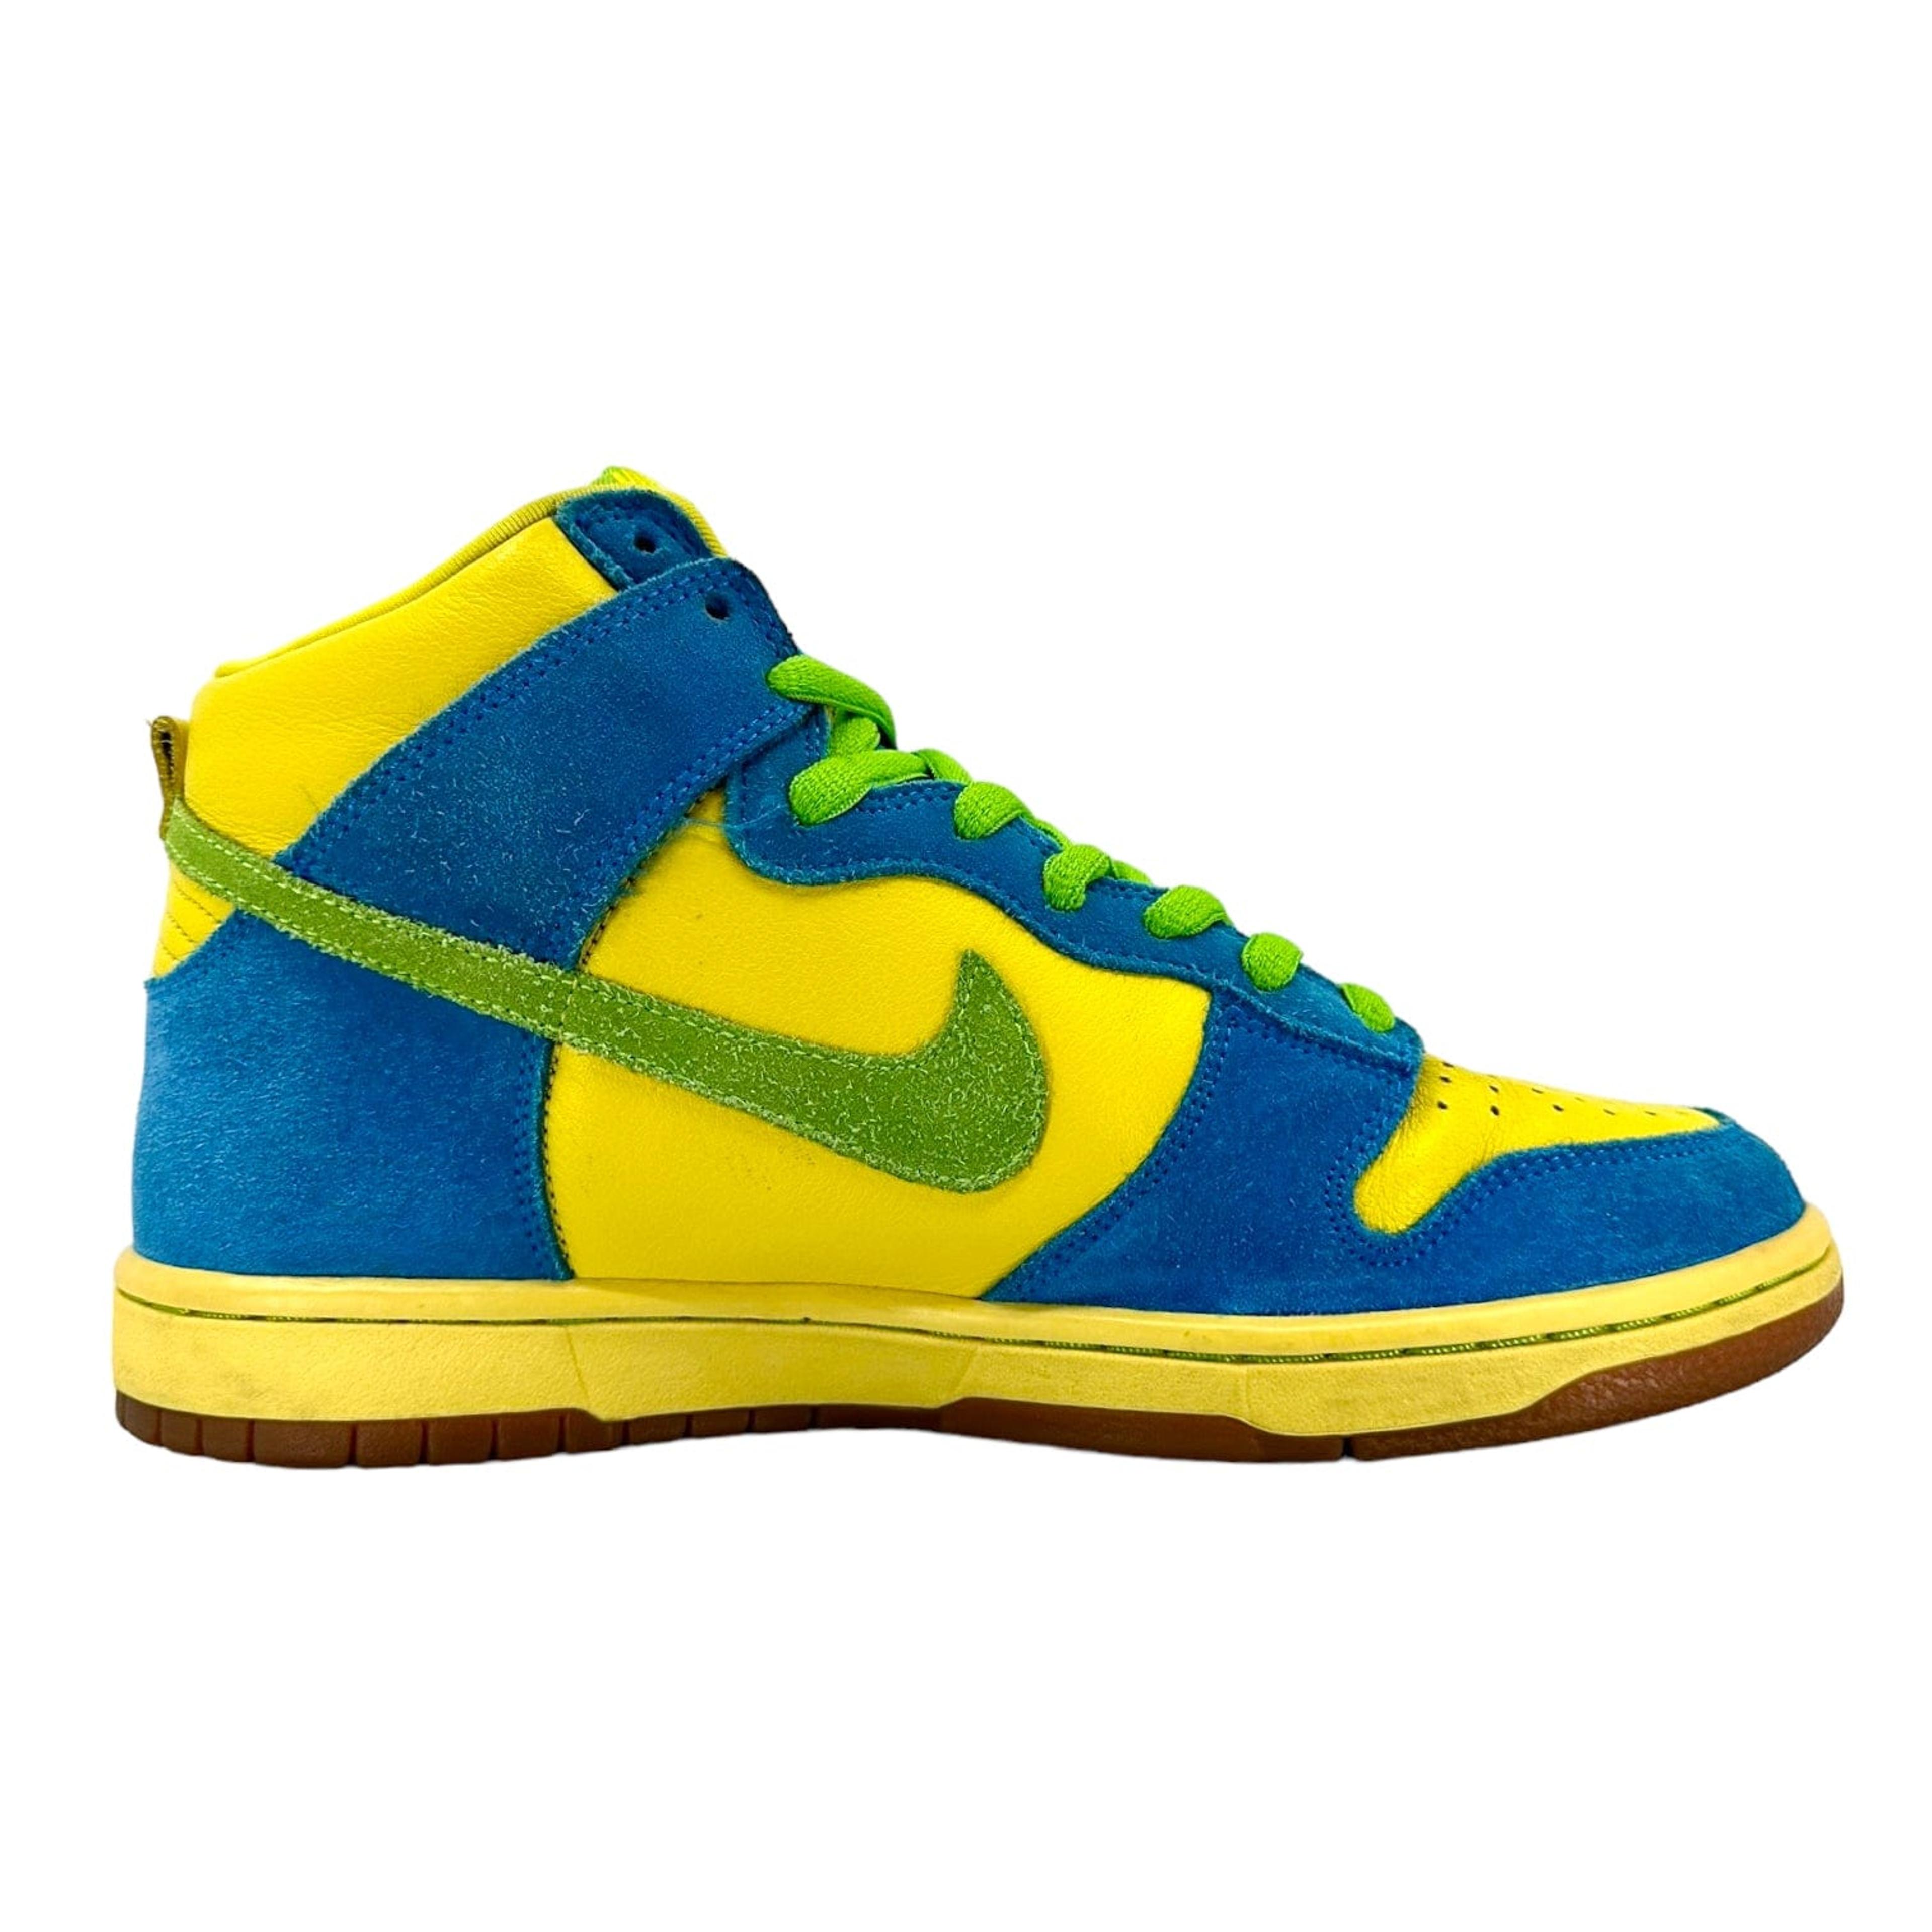 Alternate View 3 of Nike SB Dunk High Marge Simpson Pre-Owned